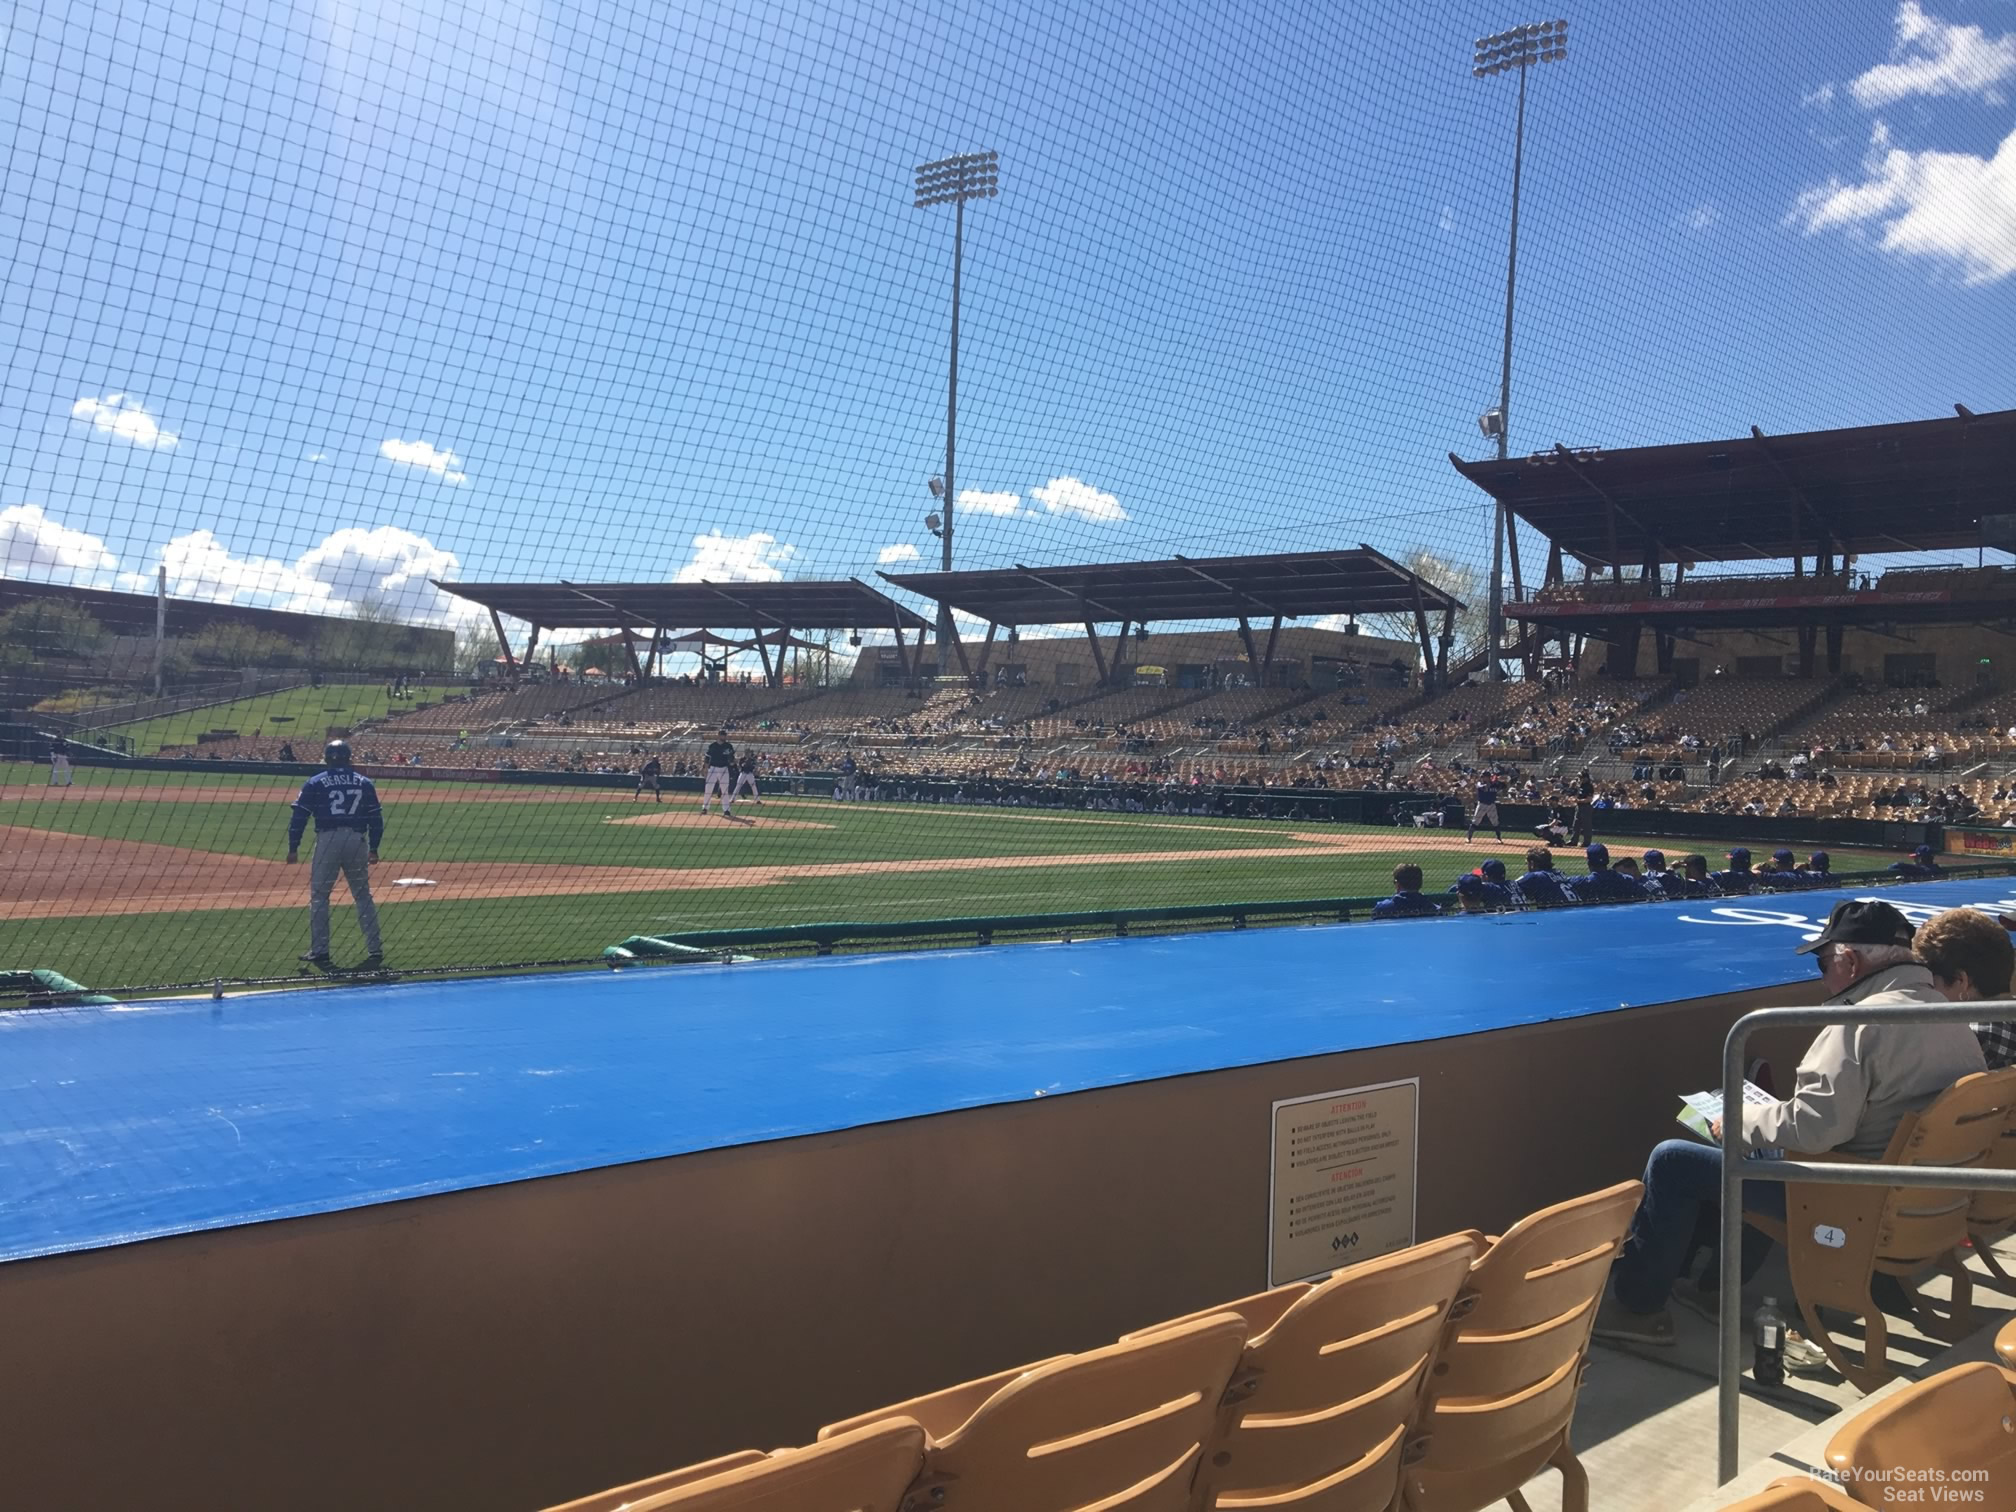 section 24, row 6 seat view  - camelback ranch